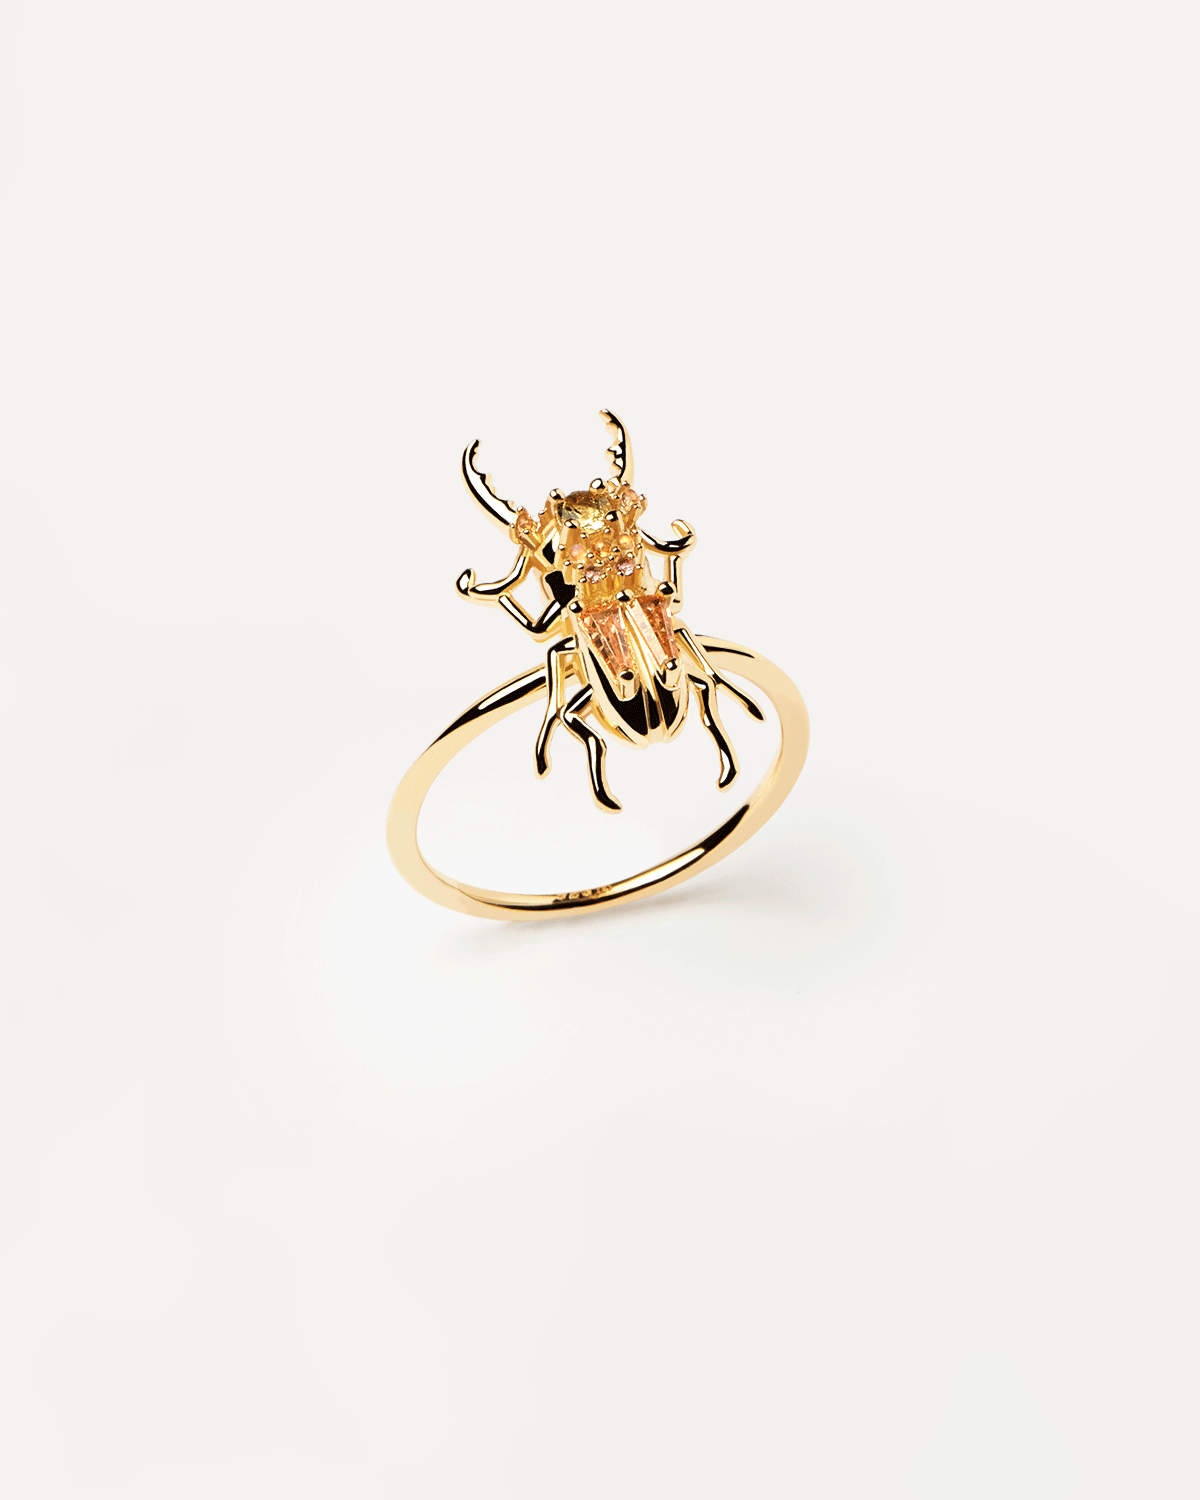 Courage Beetle Ring - 925 sterling silver / 18K gold plating